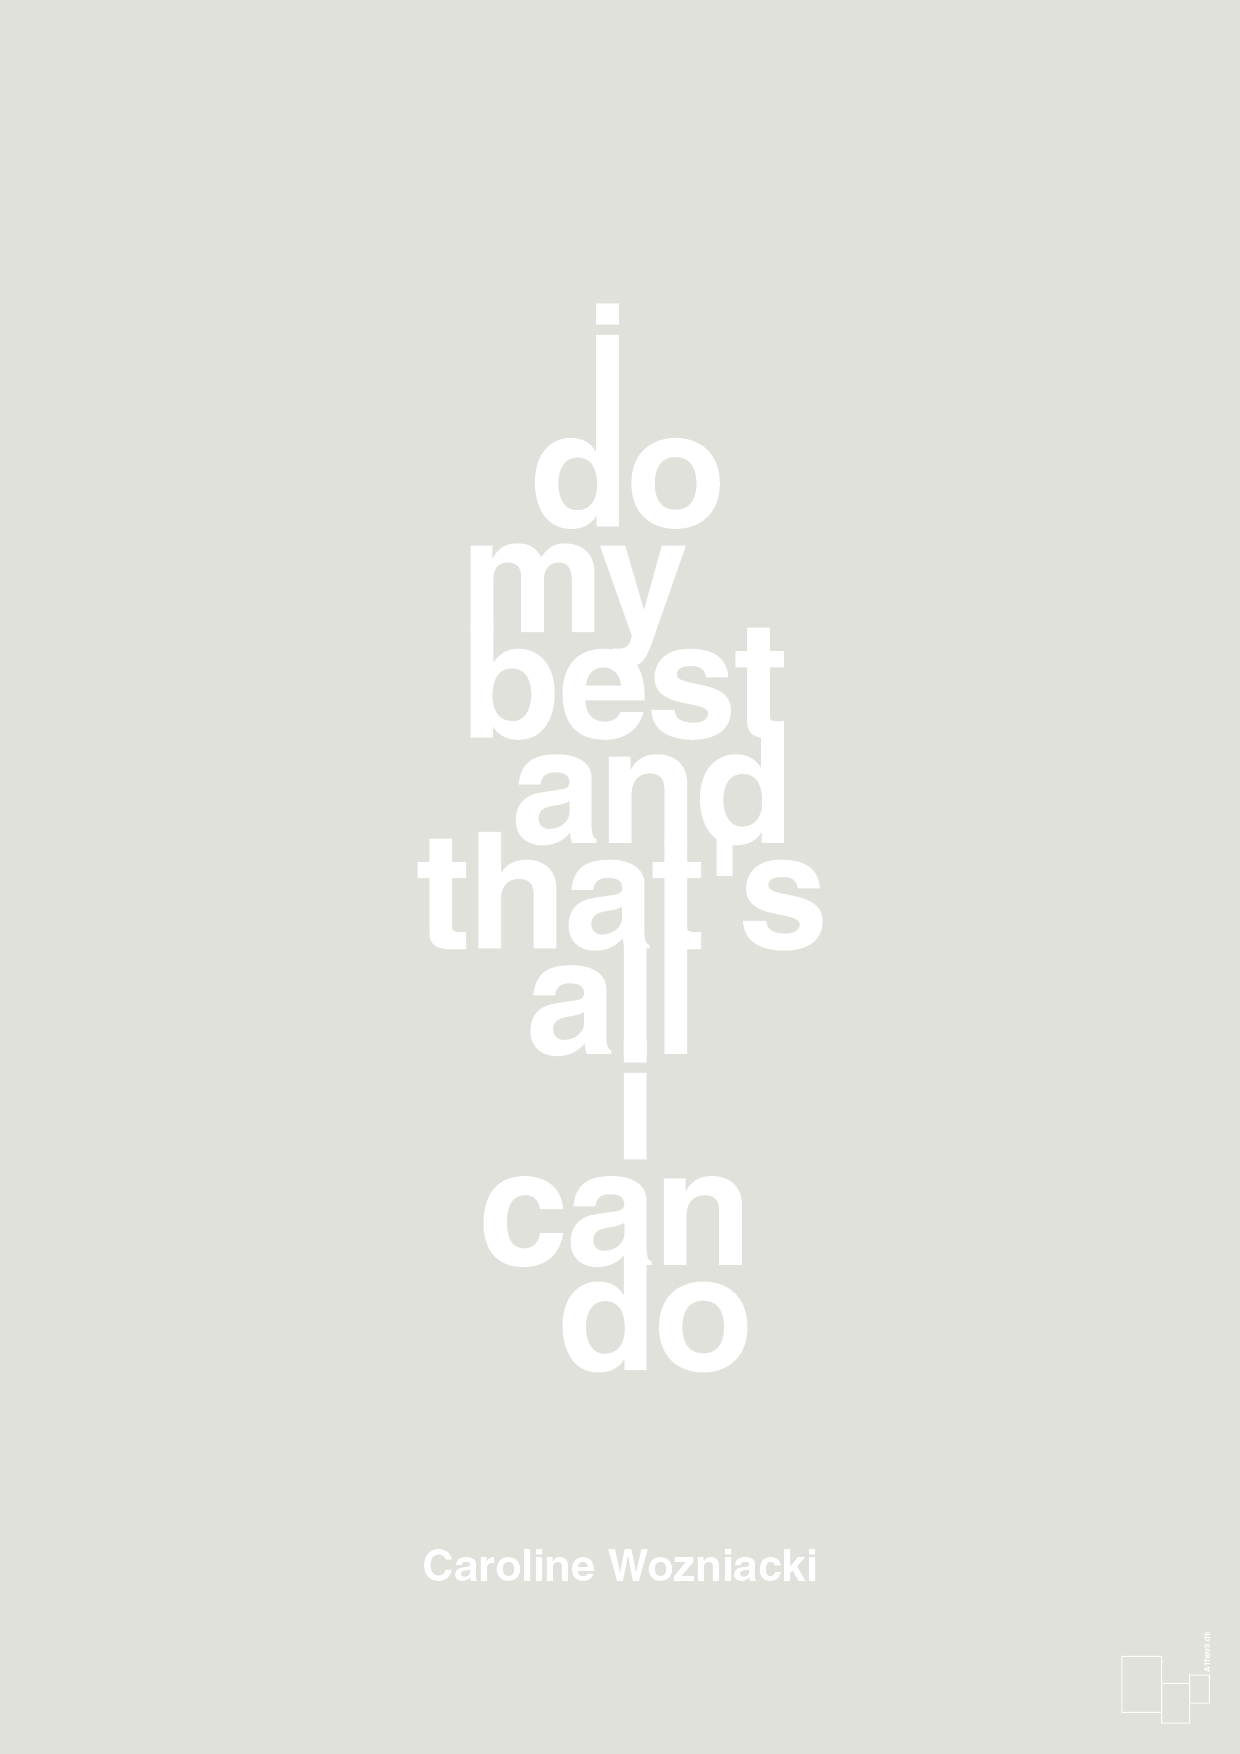 i do my best and that's all i can do - Plakat med Citater i Painters White